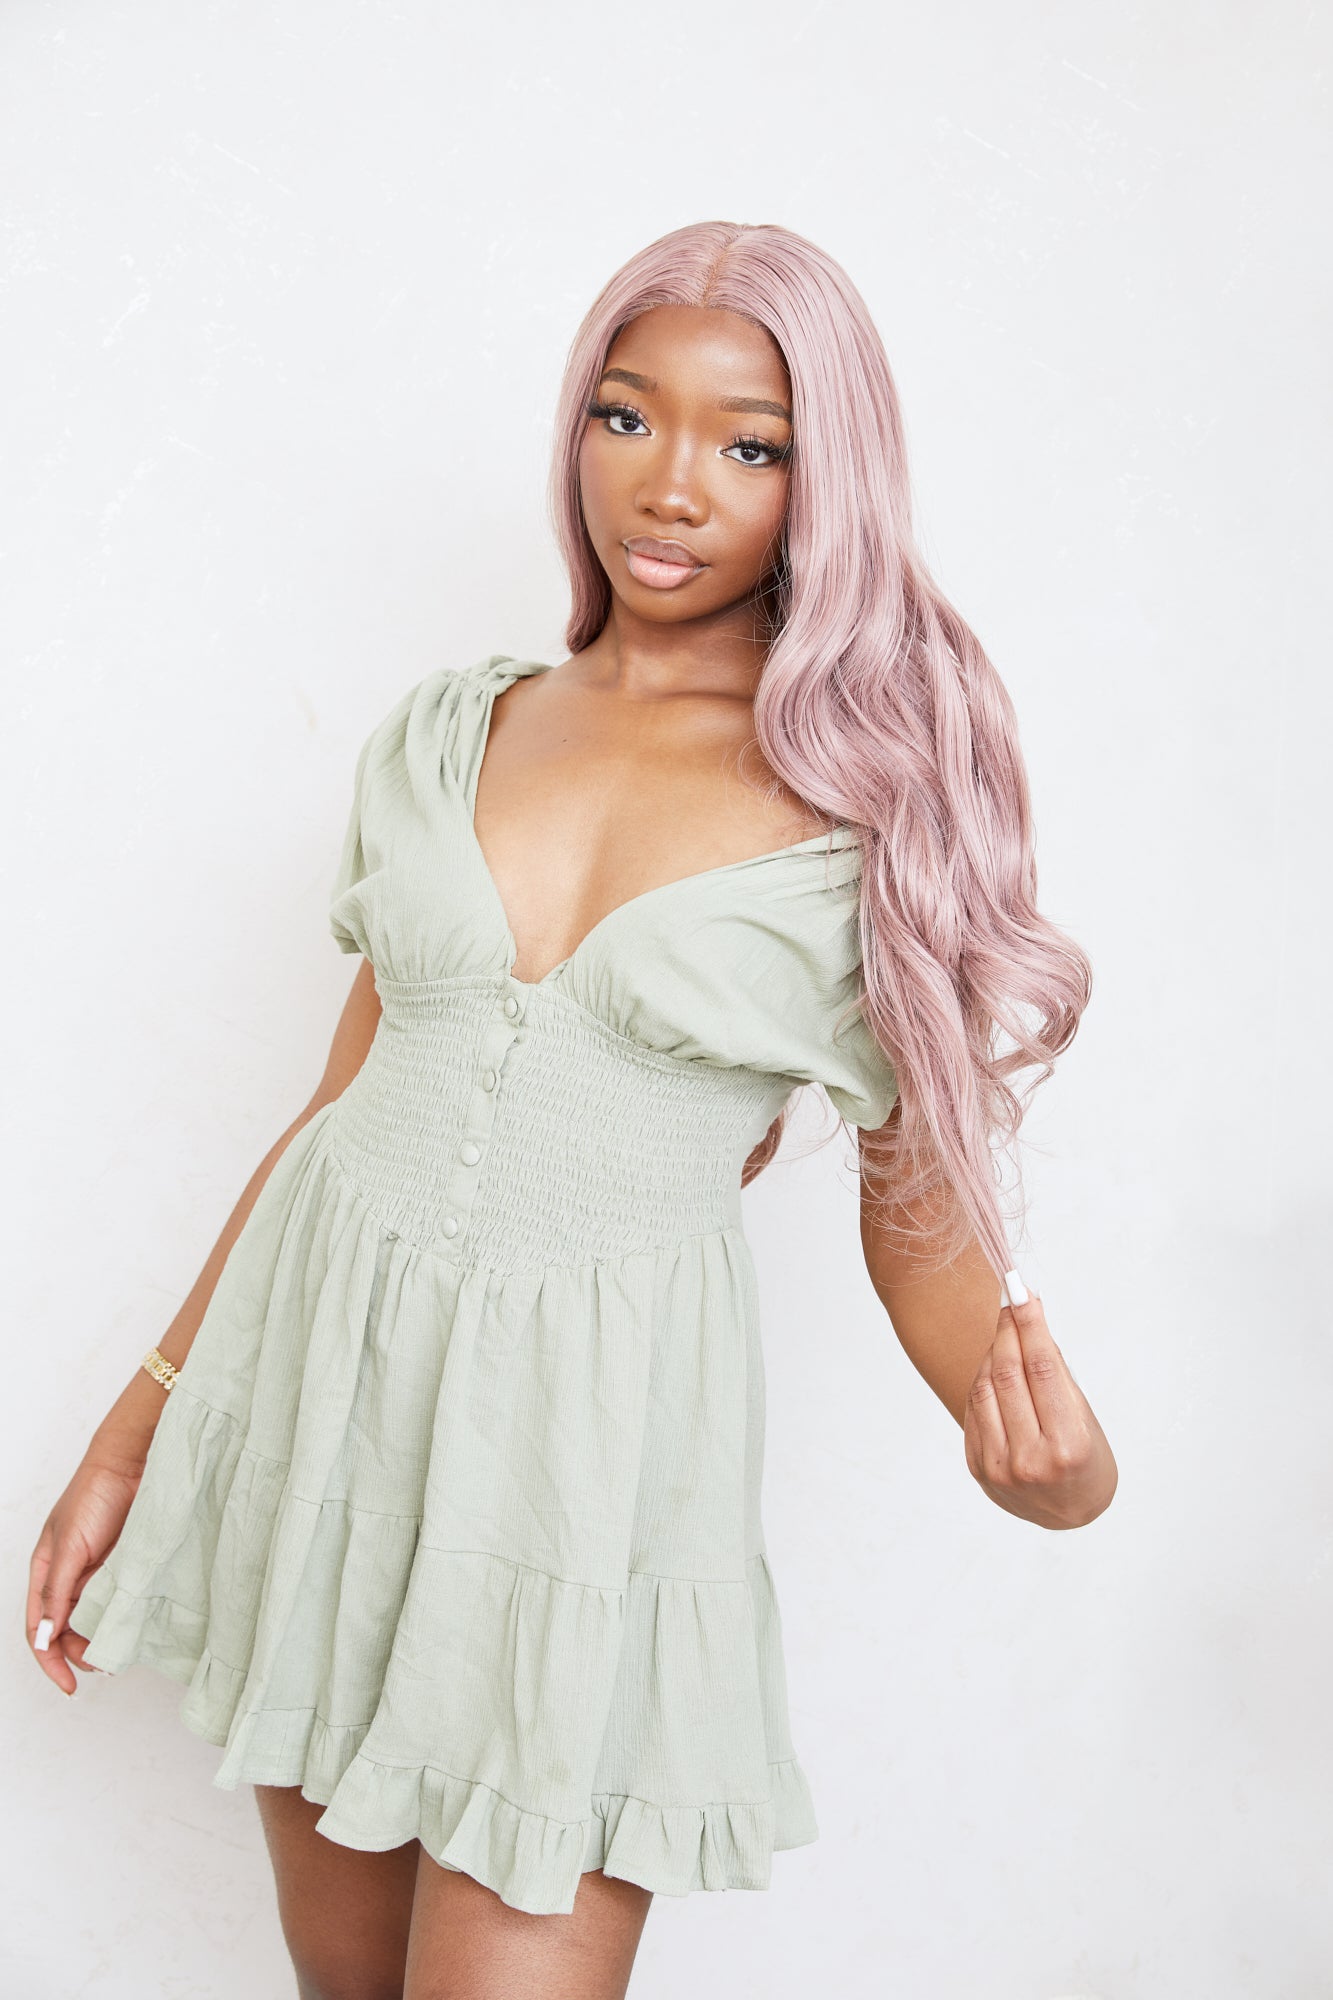 Rosé: 24-Inch Long Champagne Pink Heat Resistant Lace Frontal Synthetic Fibre Wig